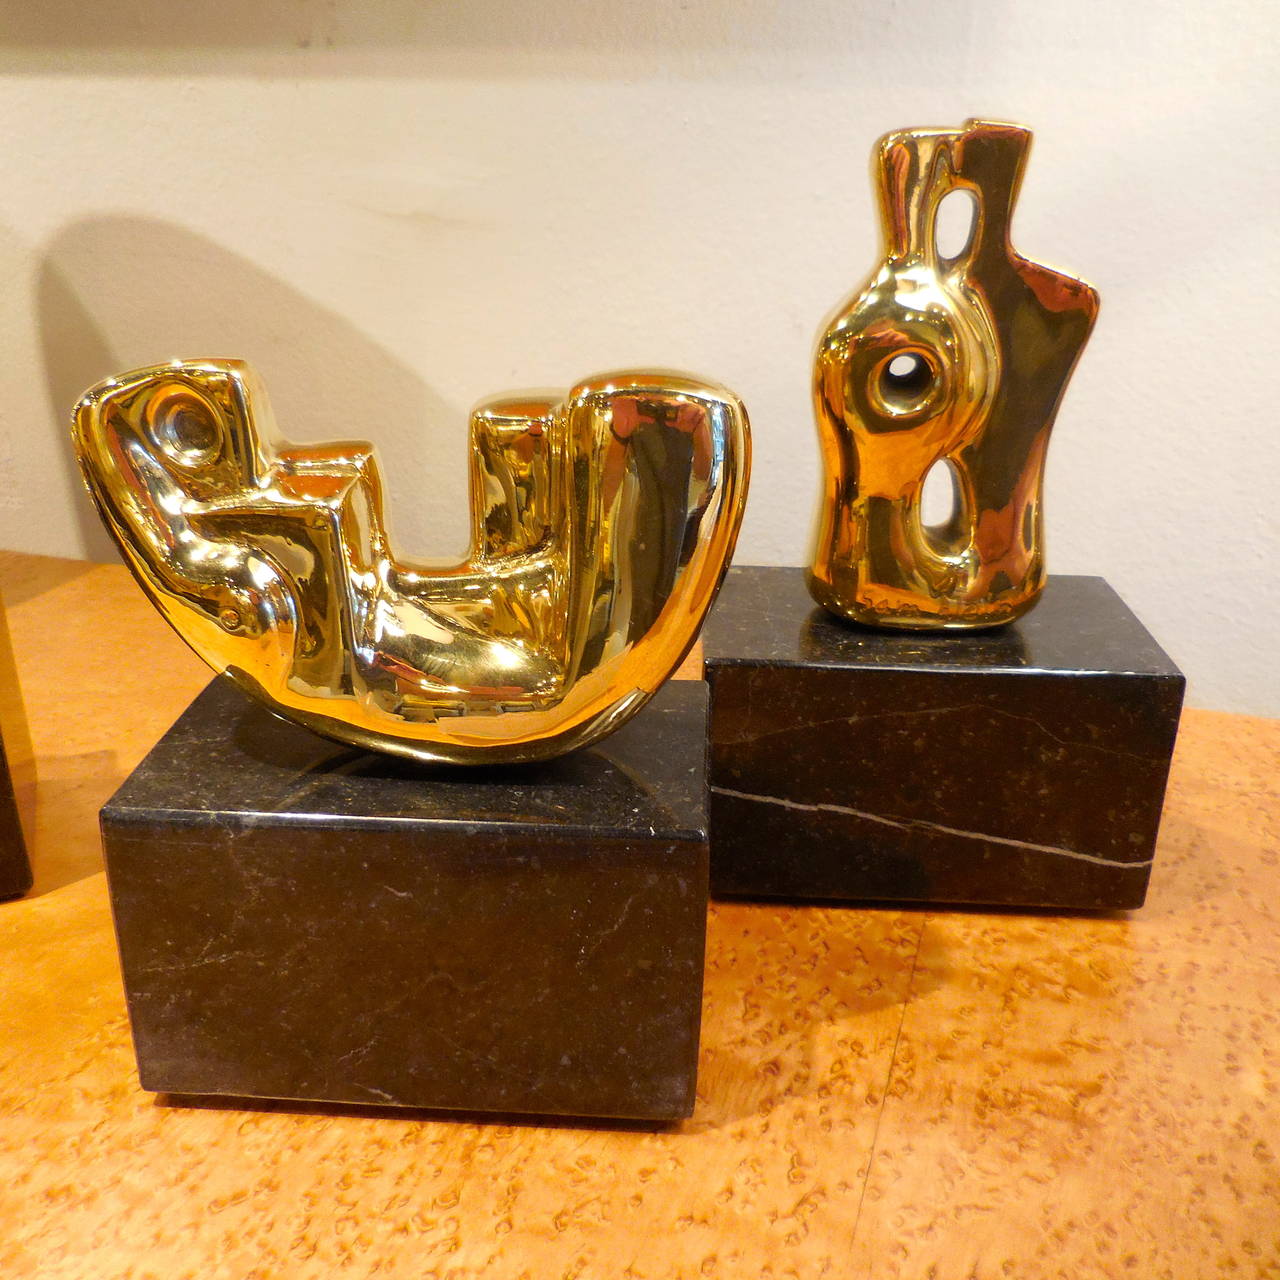 Contemporary Polished Bronze Sculptures by Canadian Sculptor Sam Aldin